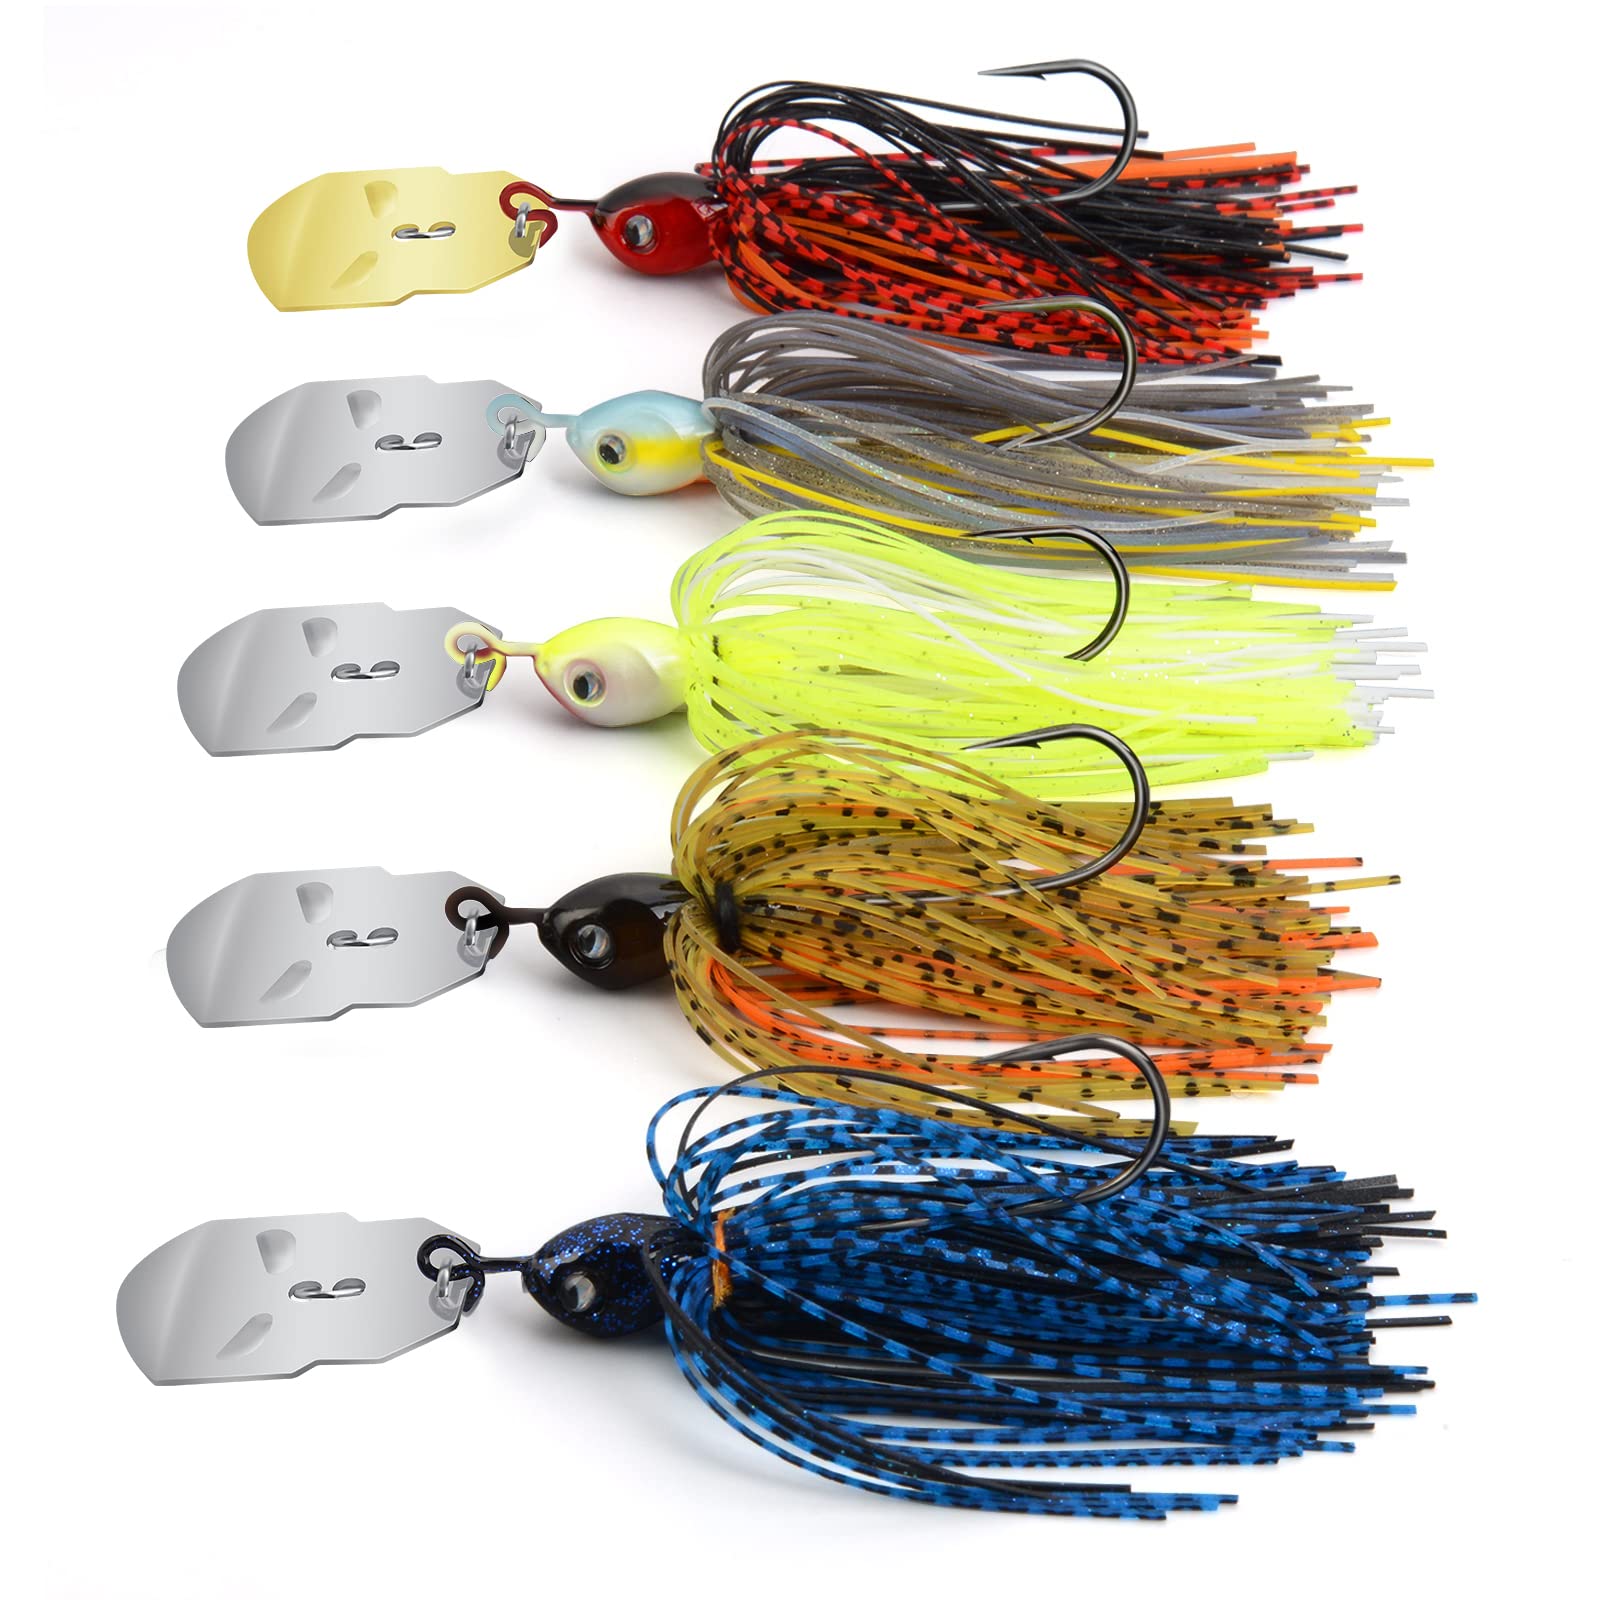 MadBite Bladed Jig Fishing Lures 5 pc and 3 pc Multi-Color Kits  Irresistible Vibrating Action